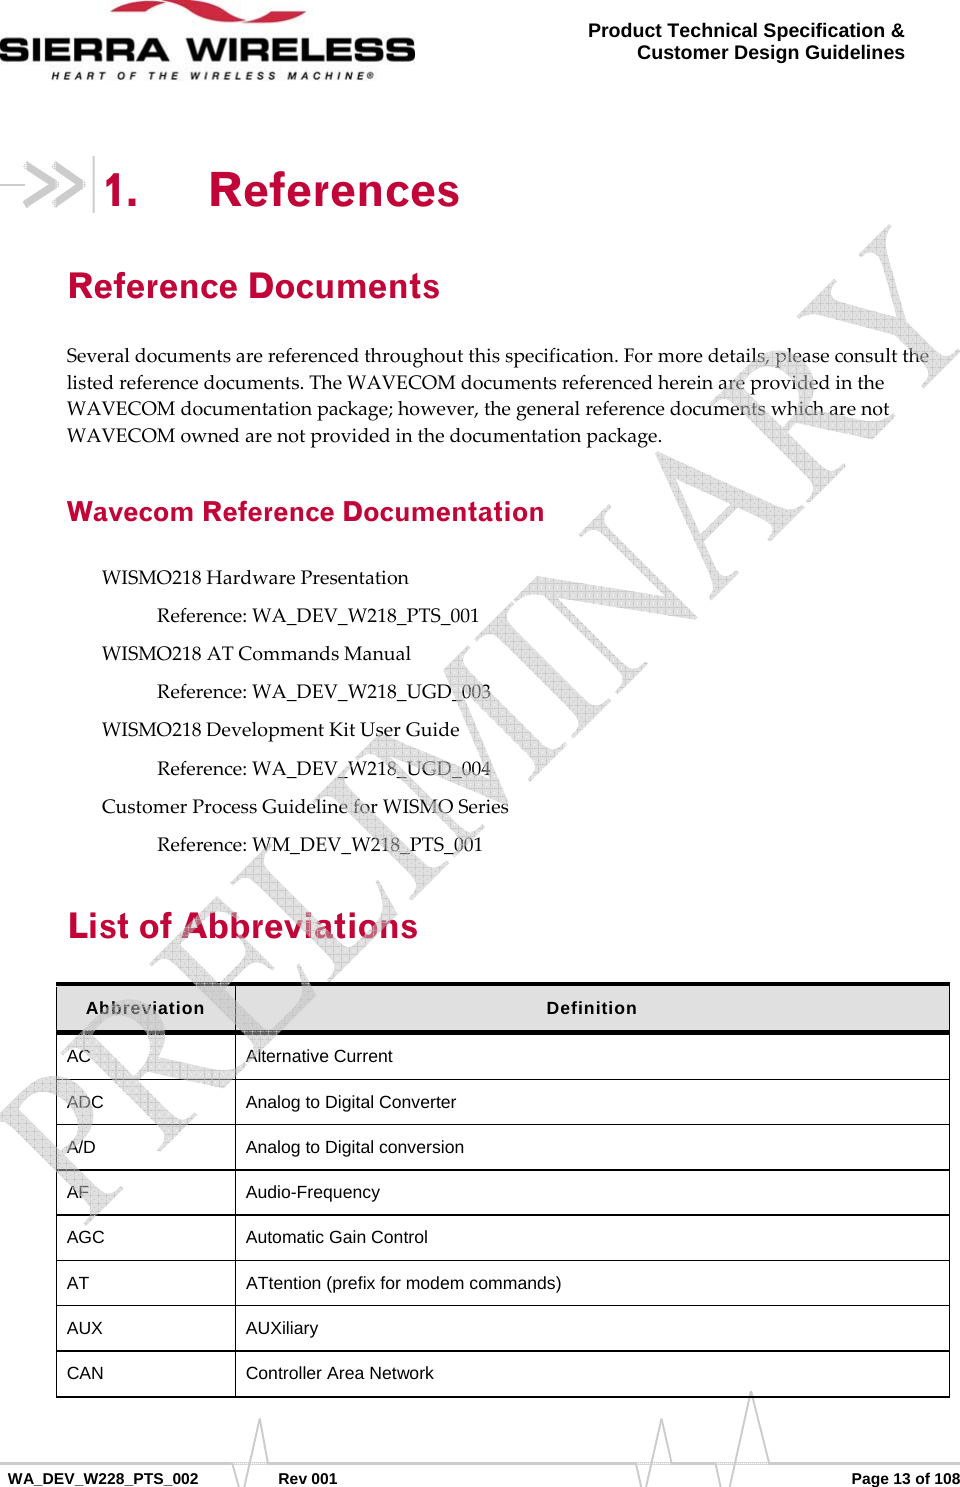      WA_DEV_W228_PTS_002 Rev 001  Page 13 of 108 Product Technical Specification &amp; Customer Design Guidelines 1. References Reference Documents Severaldocumentsarereferencedthroughoutthisspecification.Formoredetails,pleaseconsultthelistedreferencedocuments.TheWAVECOMdocumentsreferencedhereinareprovidedintheWAVECOMdocumentationpackage;however,thegeneralreferencedocumentswhicharenotWAVECOMownedarenotprovidedinthedocumentationpackage.Wavecom Reference Documentation WISMO218HardwarePresentationReference:WA_DEV_W218_PTS_001WISMO218ATCommandsManualReference:WA_DEV_W218_UGD_003WISMO218DevelopmentKitUserGuideReference:WA_DEV_W218_UGD_004CustomerProcessGuidelineforWISMOSeriesReference:WM_DEV_W218_PTS_001List of Abbreviations Abbreviation  Definition AC Alternative Current ADC  Analog to Digital Converter A/D  Analog to Digital conversion AF Audio-Frequency AGC  Automatic Gain Control AT  ATtention (prefix for modem commands) AUX AUXiliary CAN Controller Area Network    